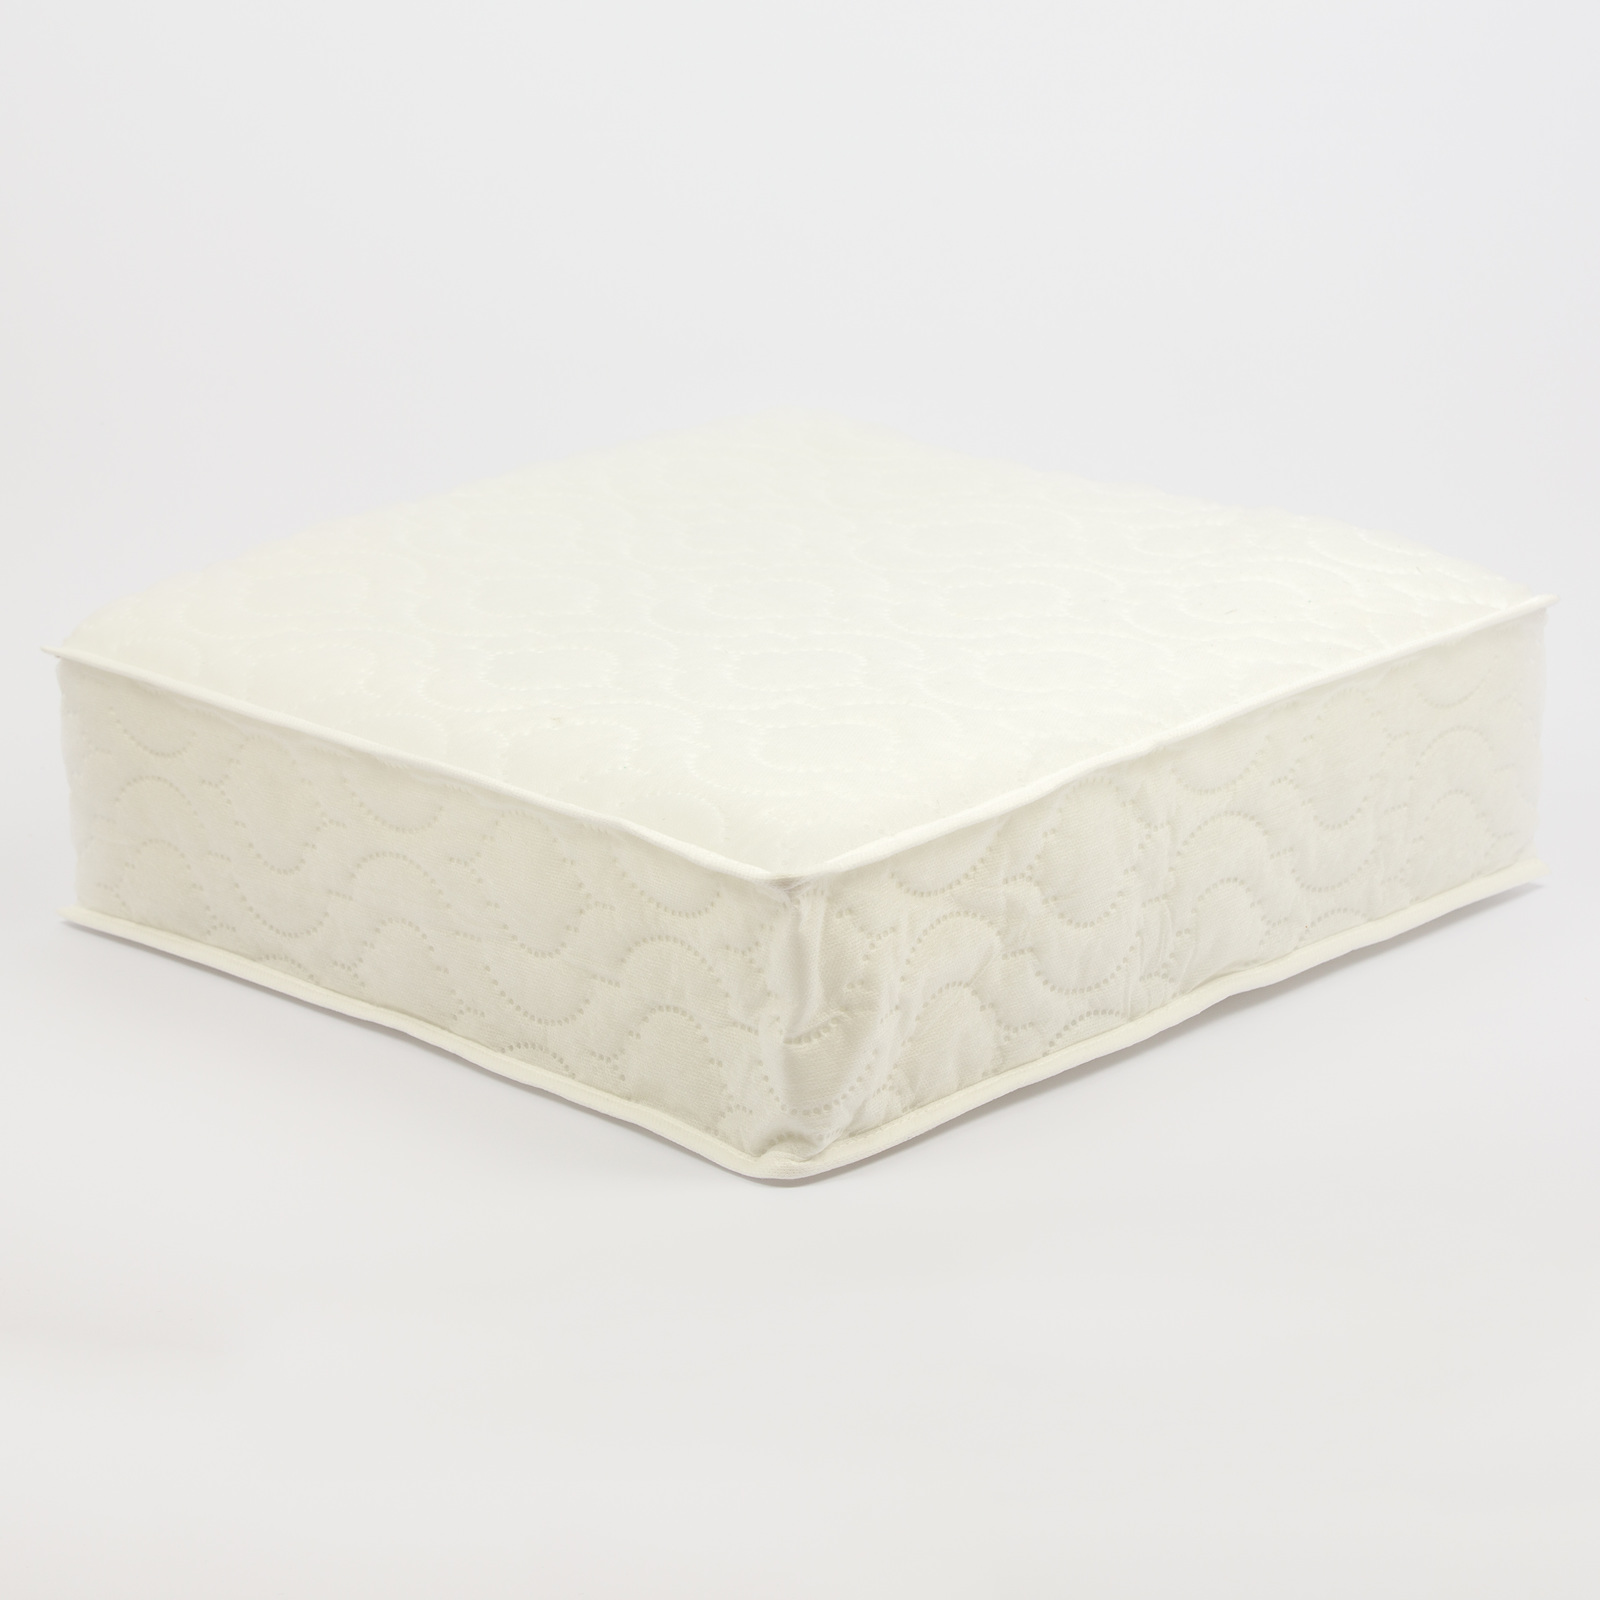 127 x 63 cm fully sprung mattress for cots